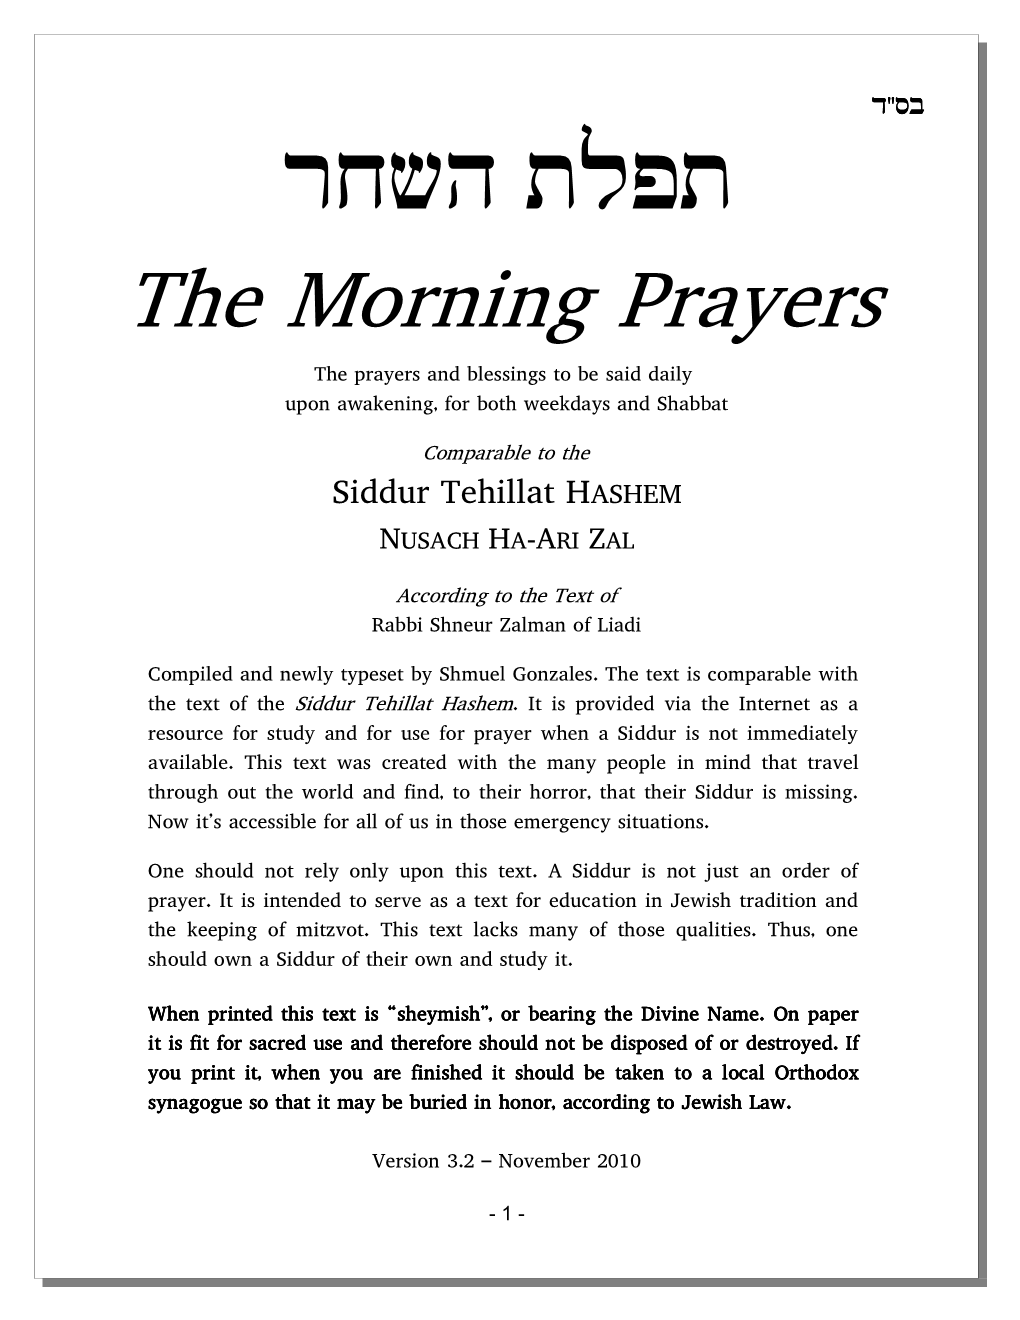 The Morning Prayers the Prayers and Blessings to Be Said Daily Upon Awakening, for Both Weekdays and Shabbat